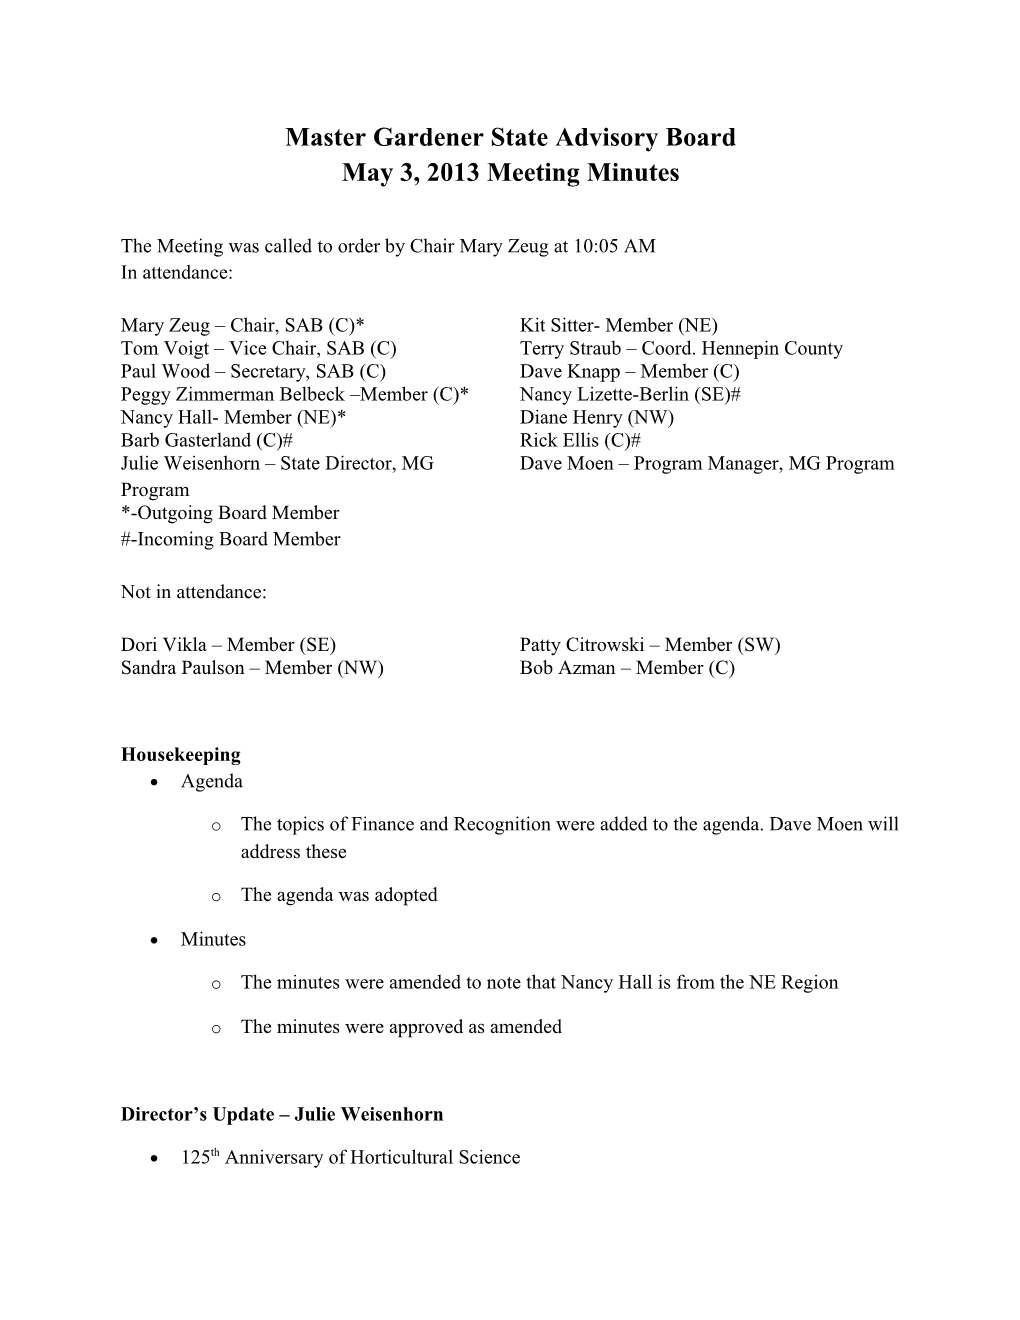 Notes from Meeting 4 May